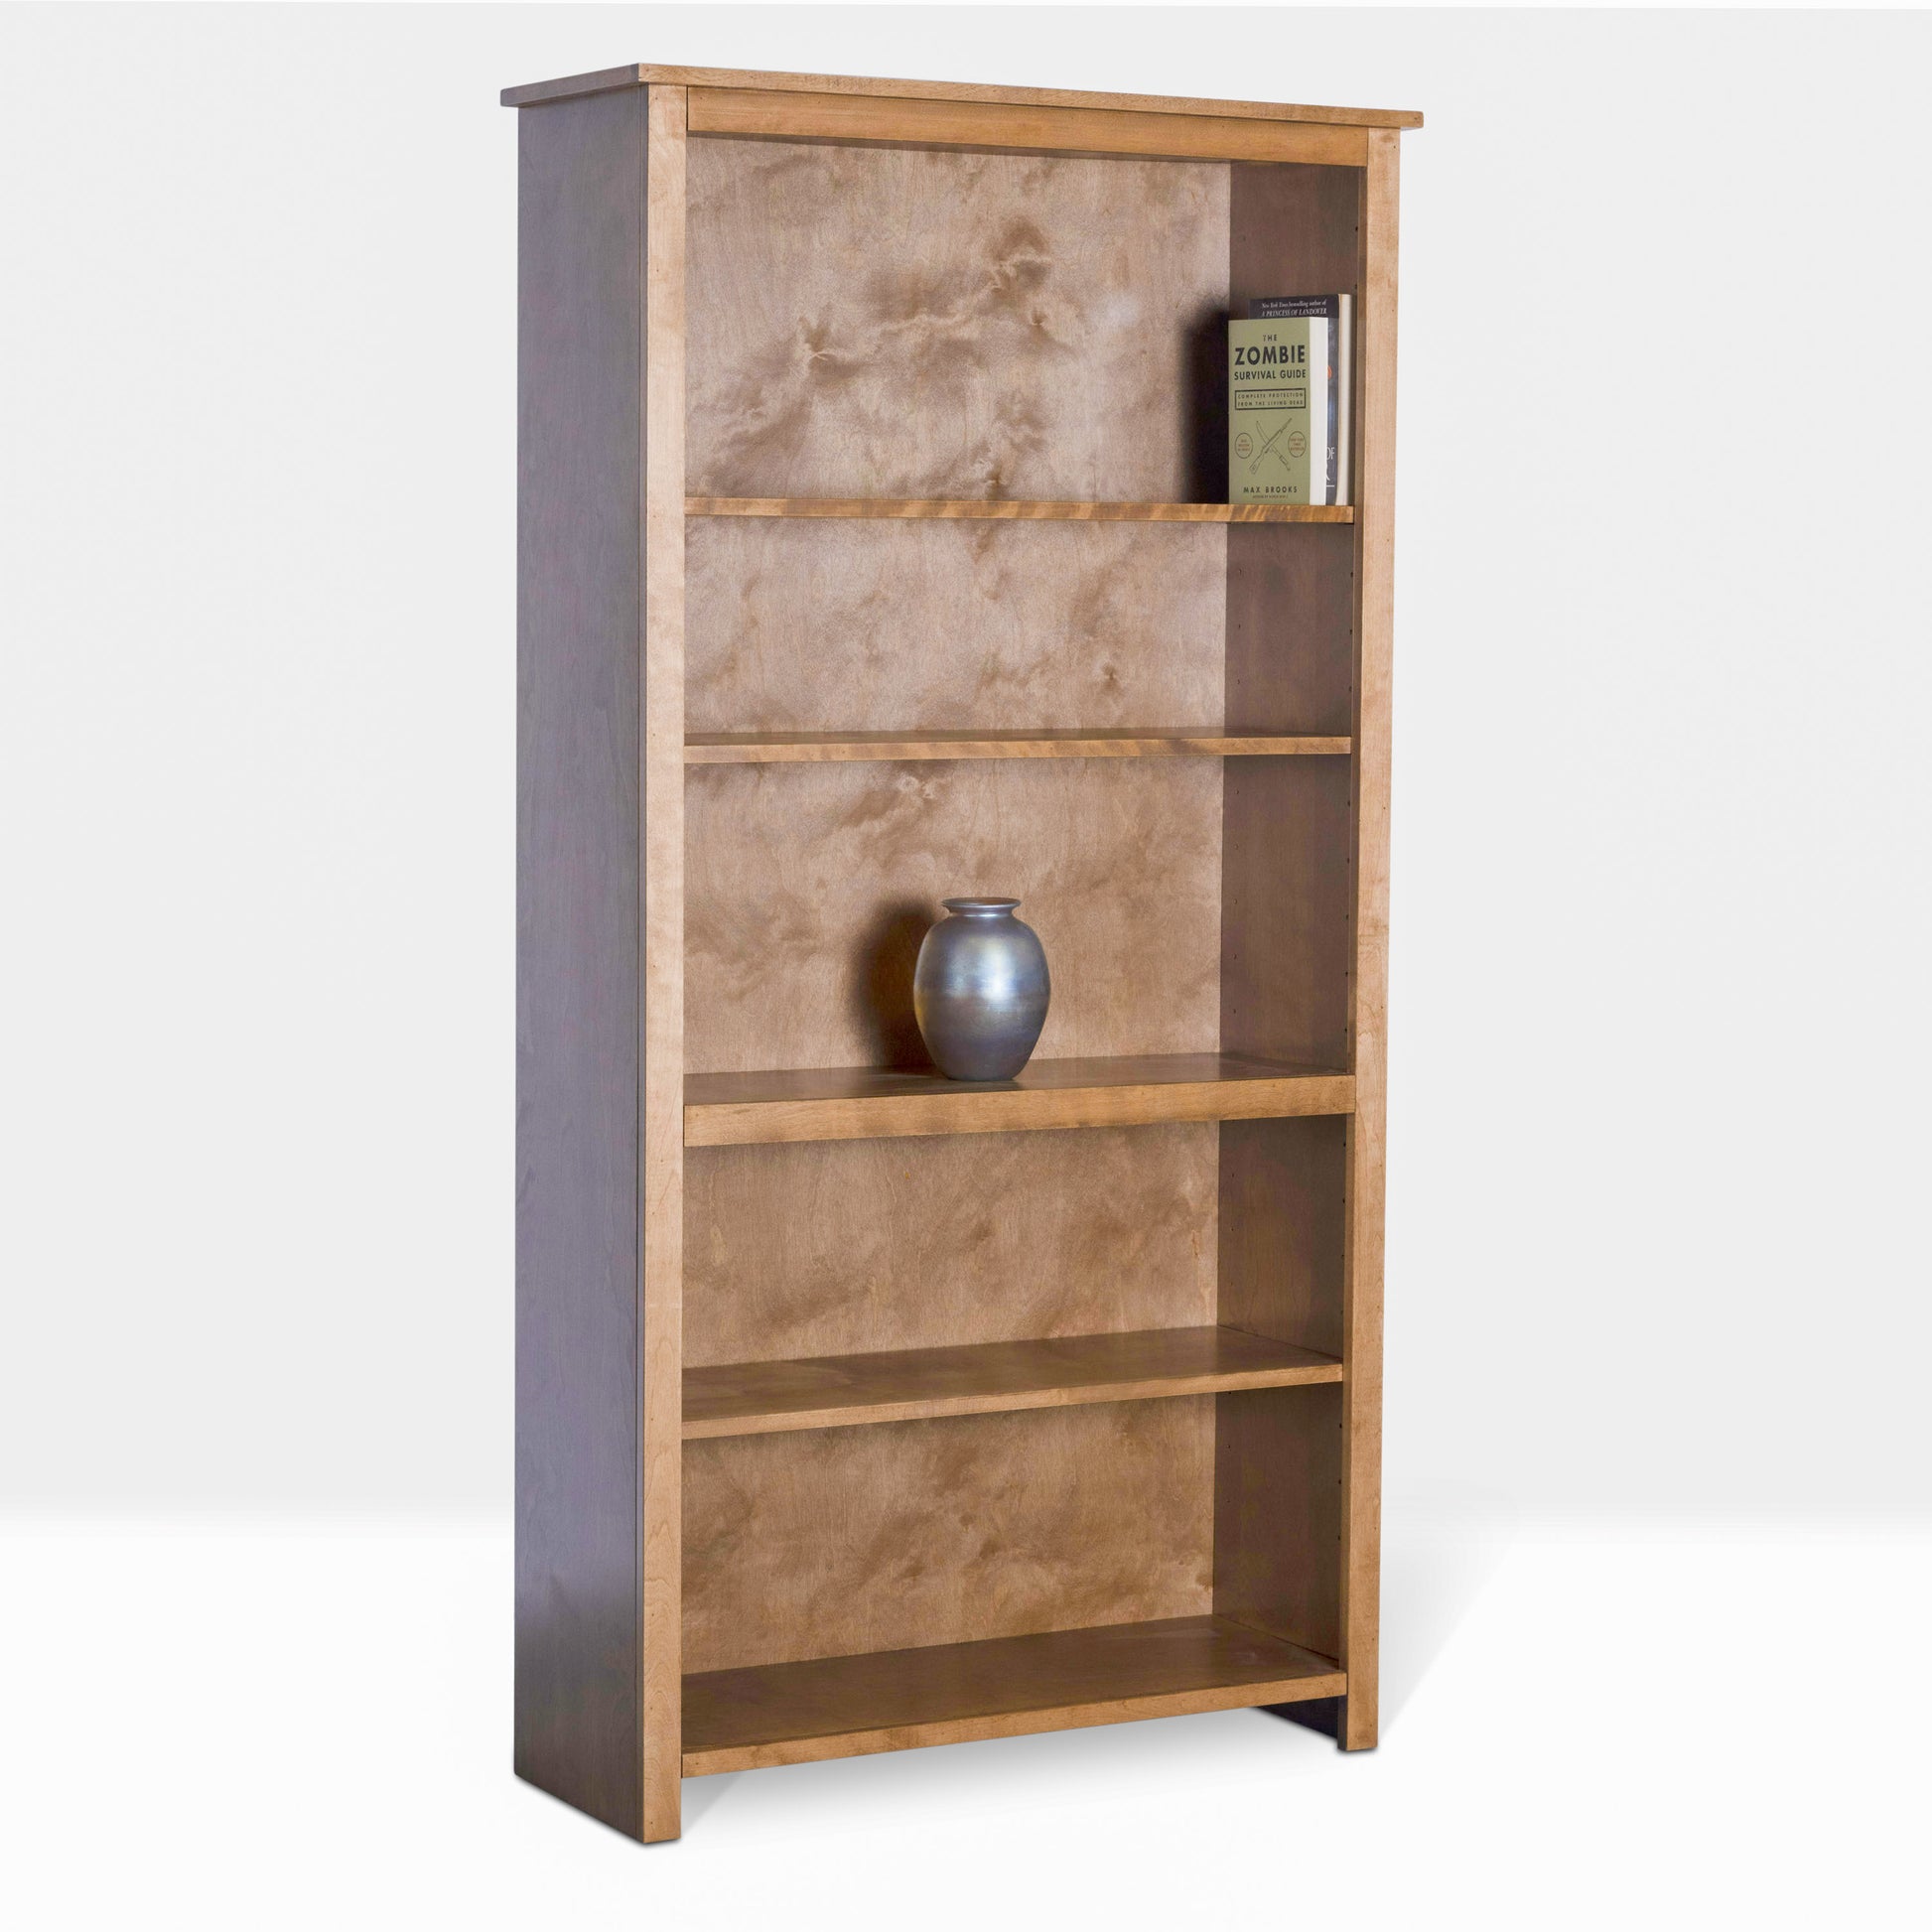 Berkshire Easton Bookcase, built in birch wood, and shown from an angle. Pictured in Distressed Pecan finish.